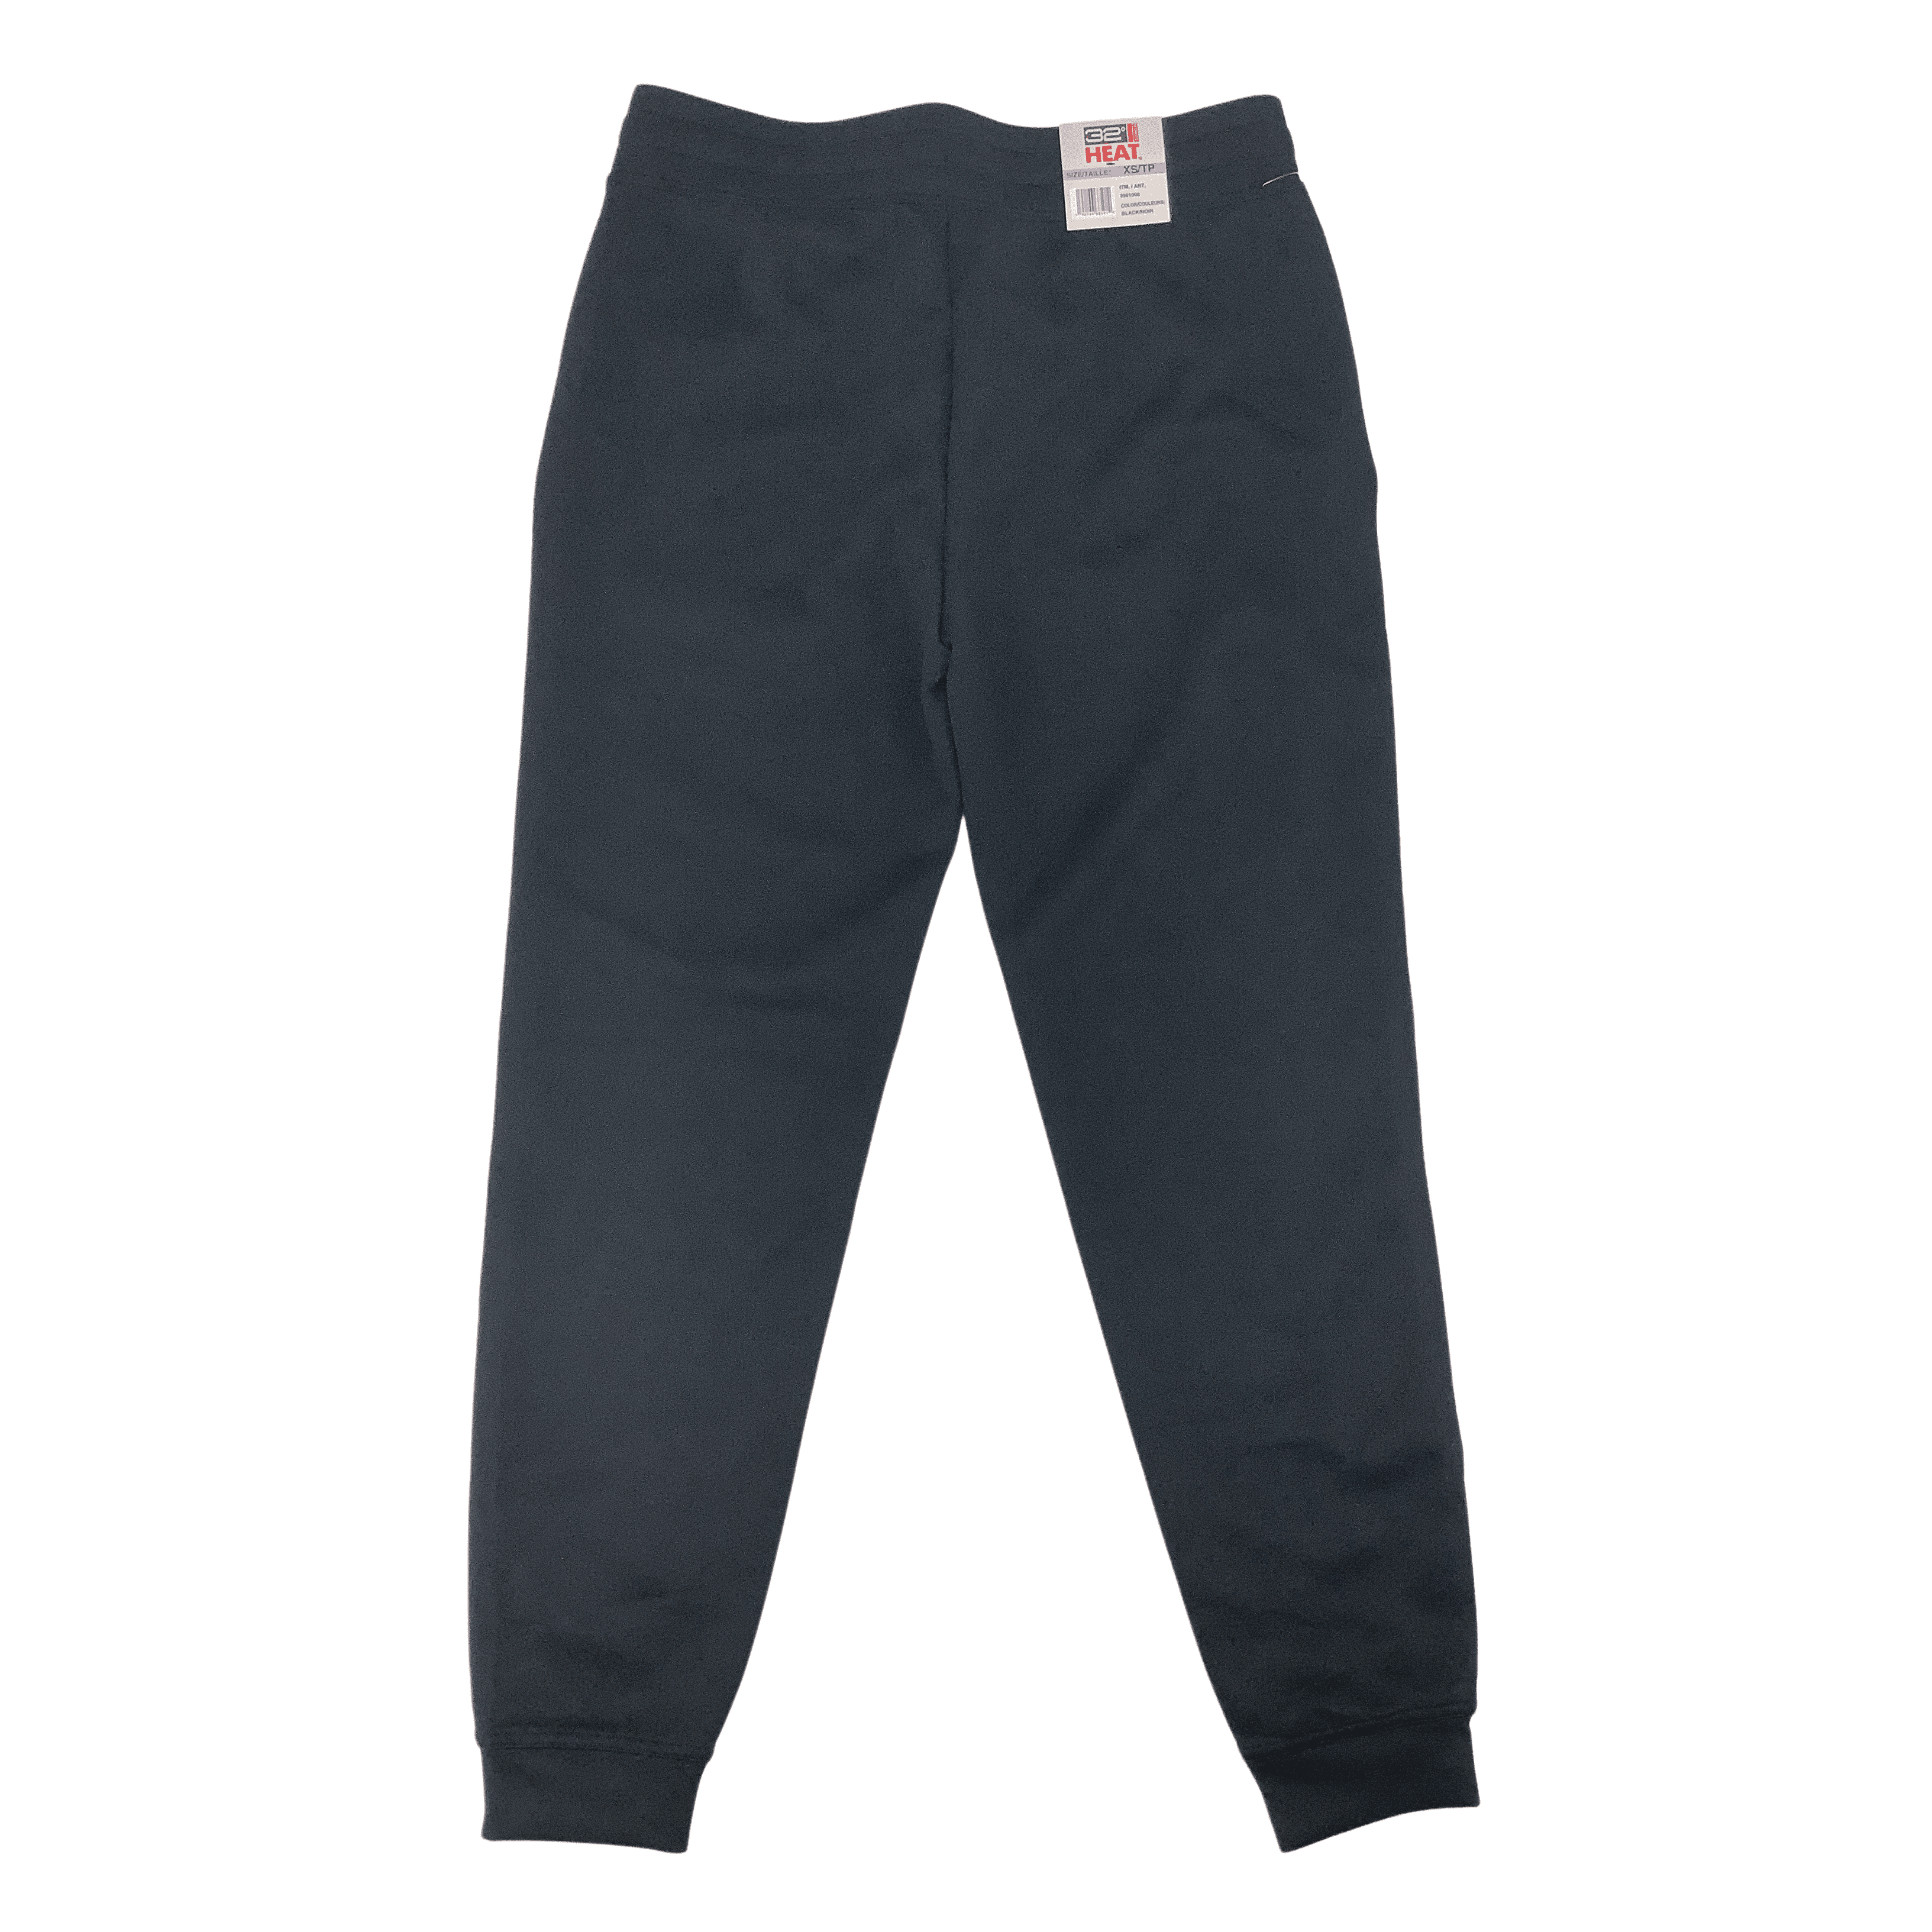 32 Degrees Heat Women's Sweatpants / Various Colours and Sizes